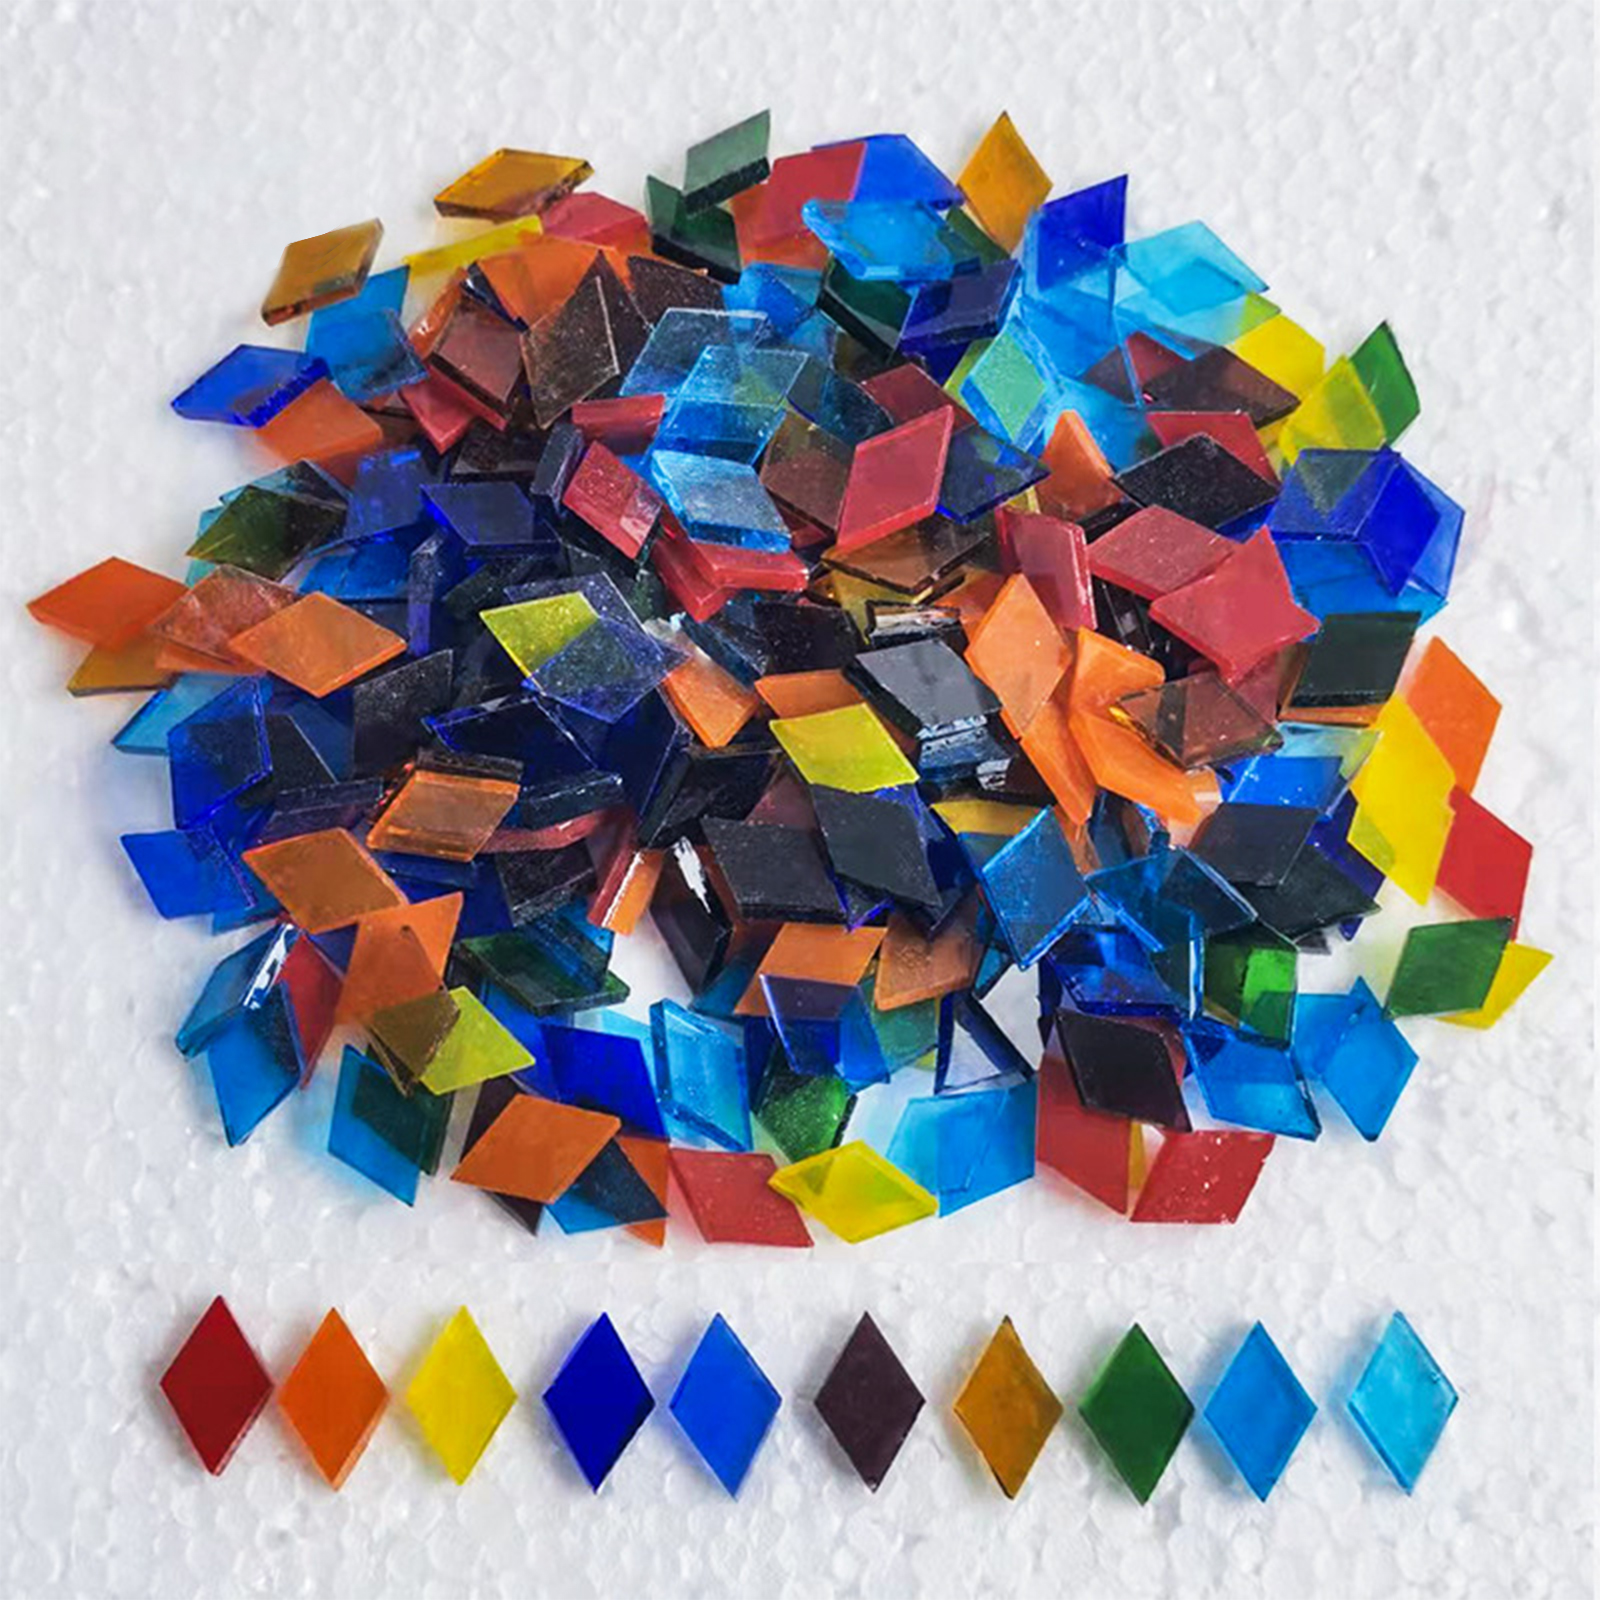 800 Pieces Mixed Shapes Mosaic Tiles for Crafts Bulk Ceramic Glass Mosaic  Pieces Colorful Stained Glass Mosaic Kits for Adults DIY Mosaic Making